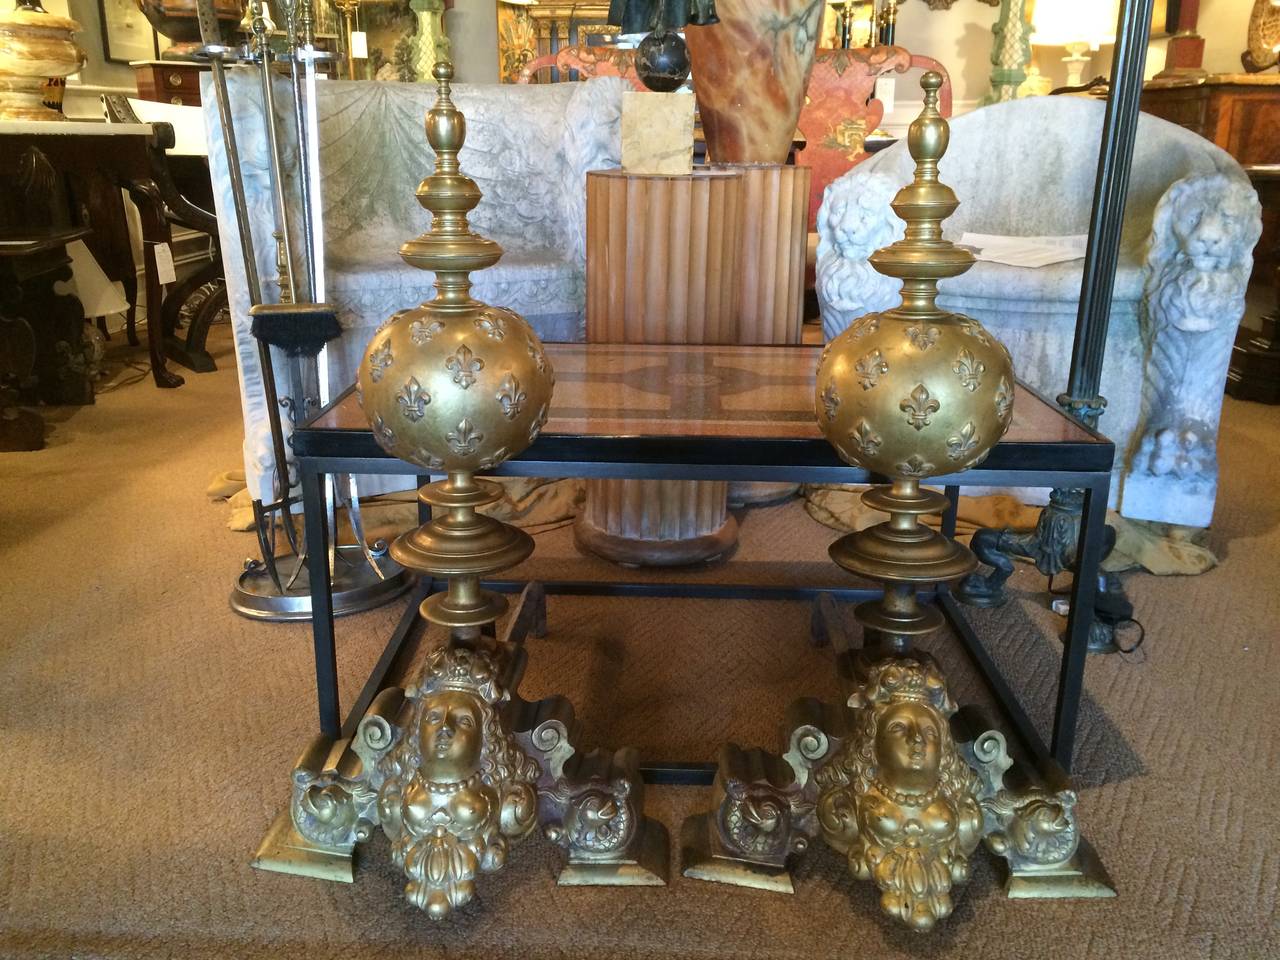 Fantastic pair of large-scale French Louis XV style bronze andirons. The bases depicting bare breasted goddesses looking upwards with curled serpents on either side, above a globe decorated with fluer-de-lys topped by a beautifully turned finial.